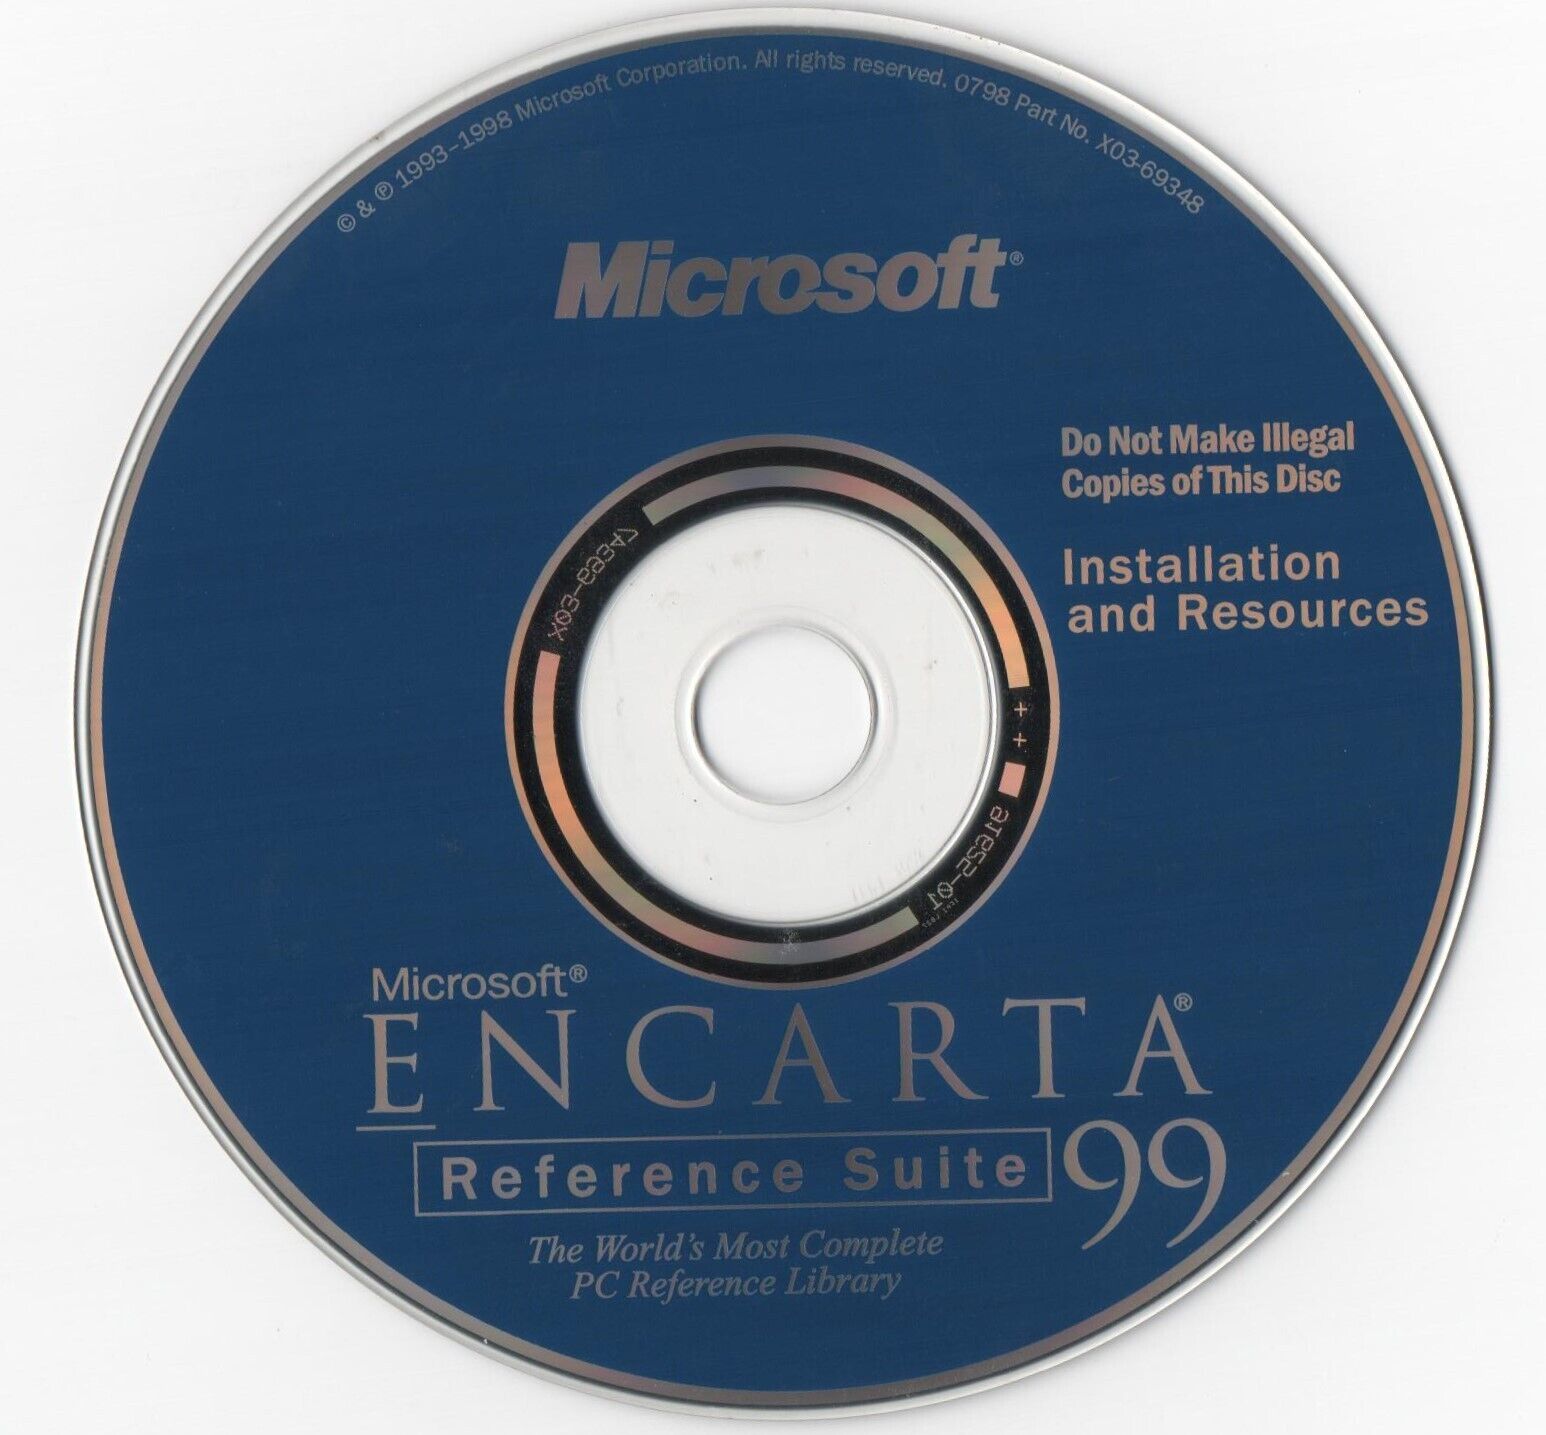 microscoft encarta reference suite cd intallation and resources